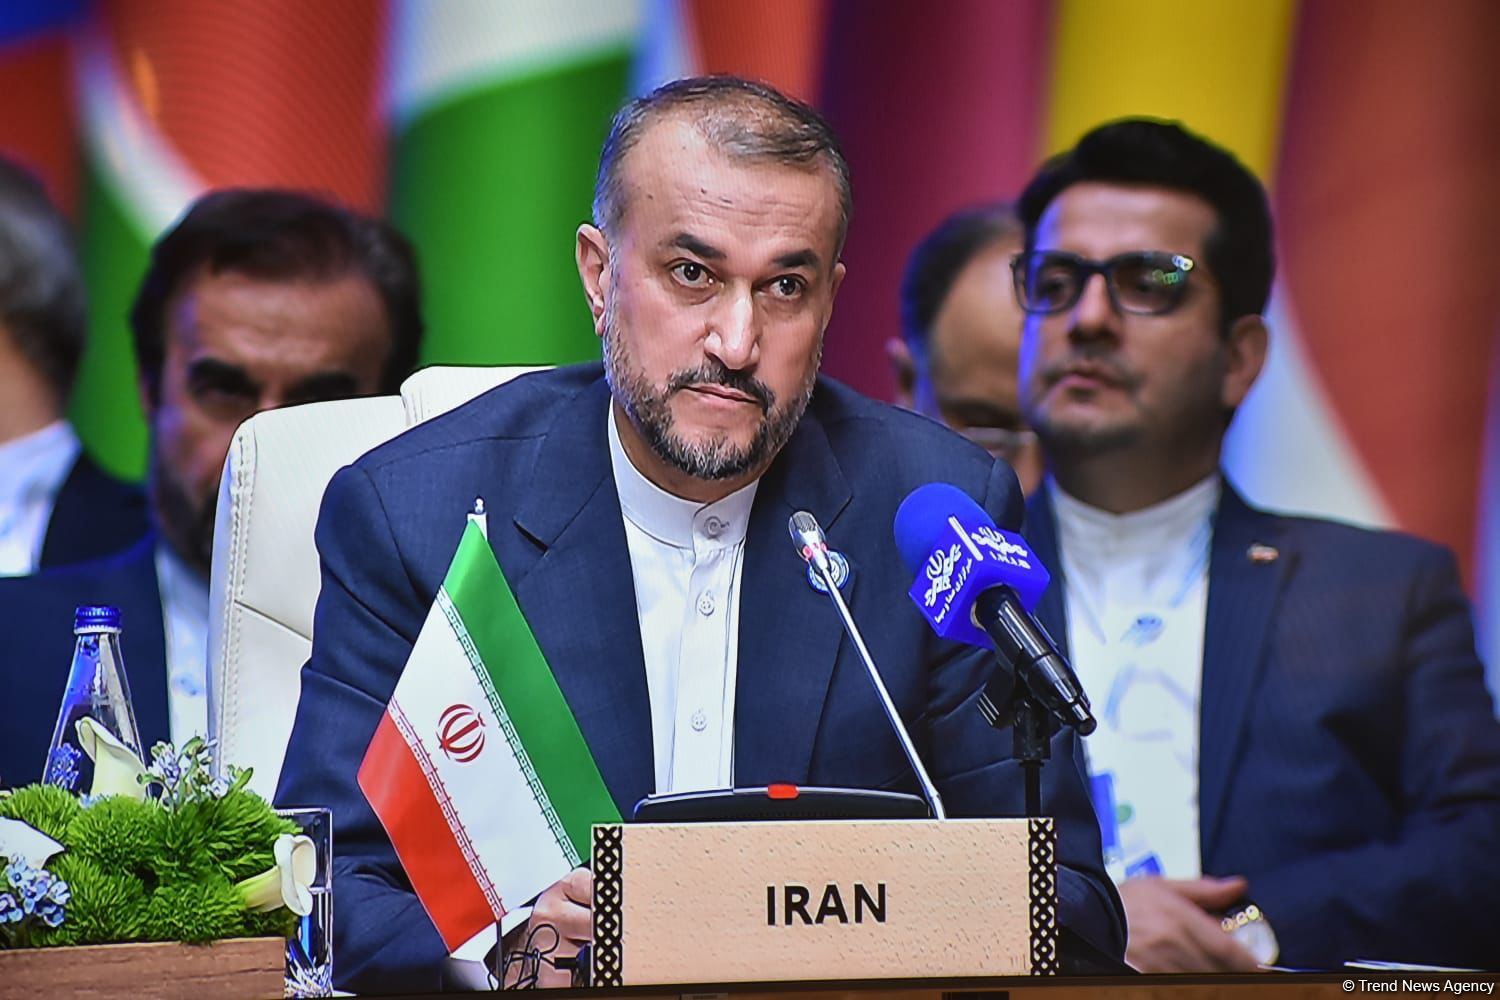 Iran supports peaceful settlement in South Caucasus - FM